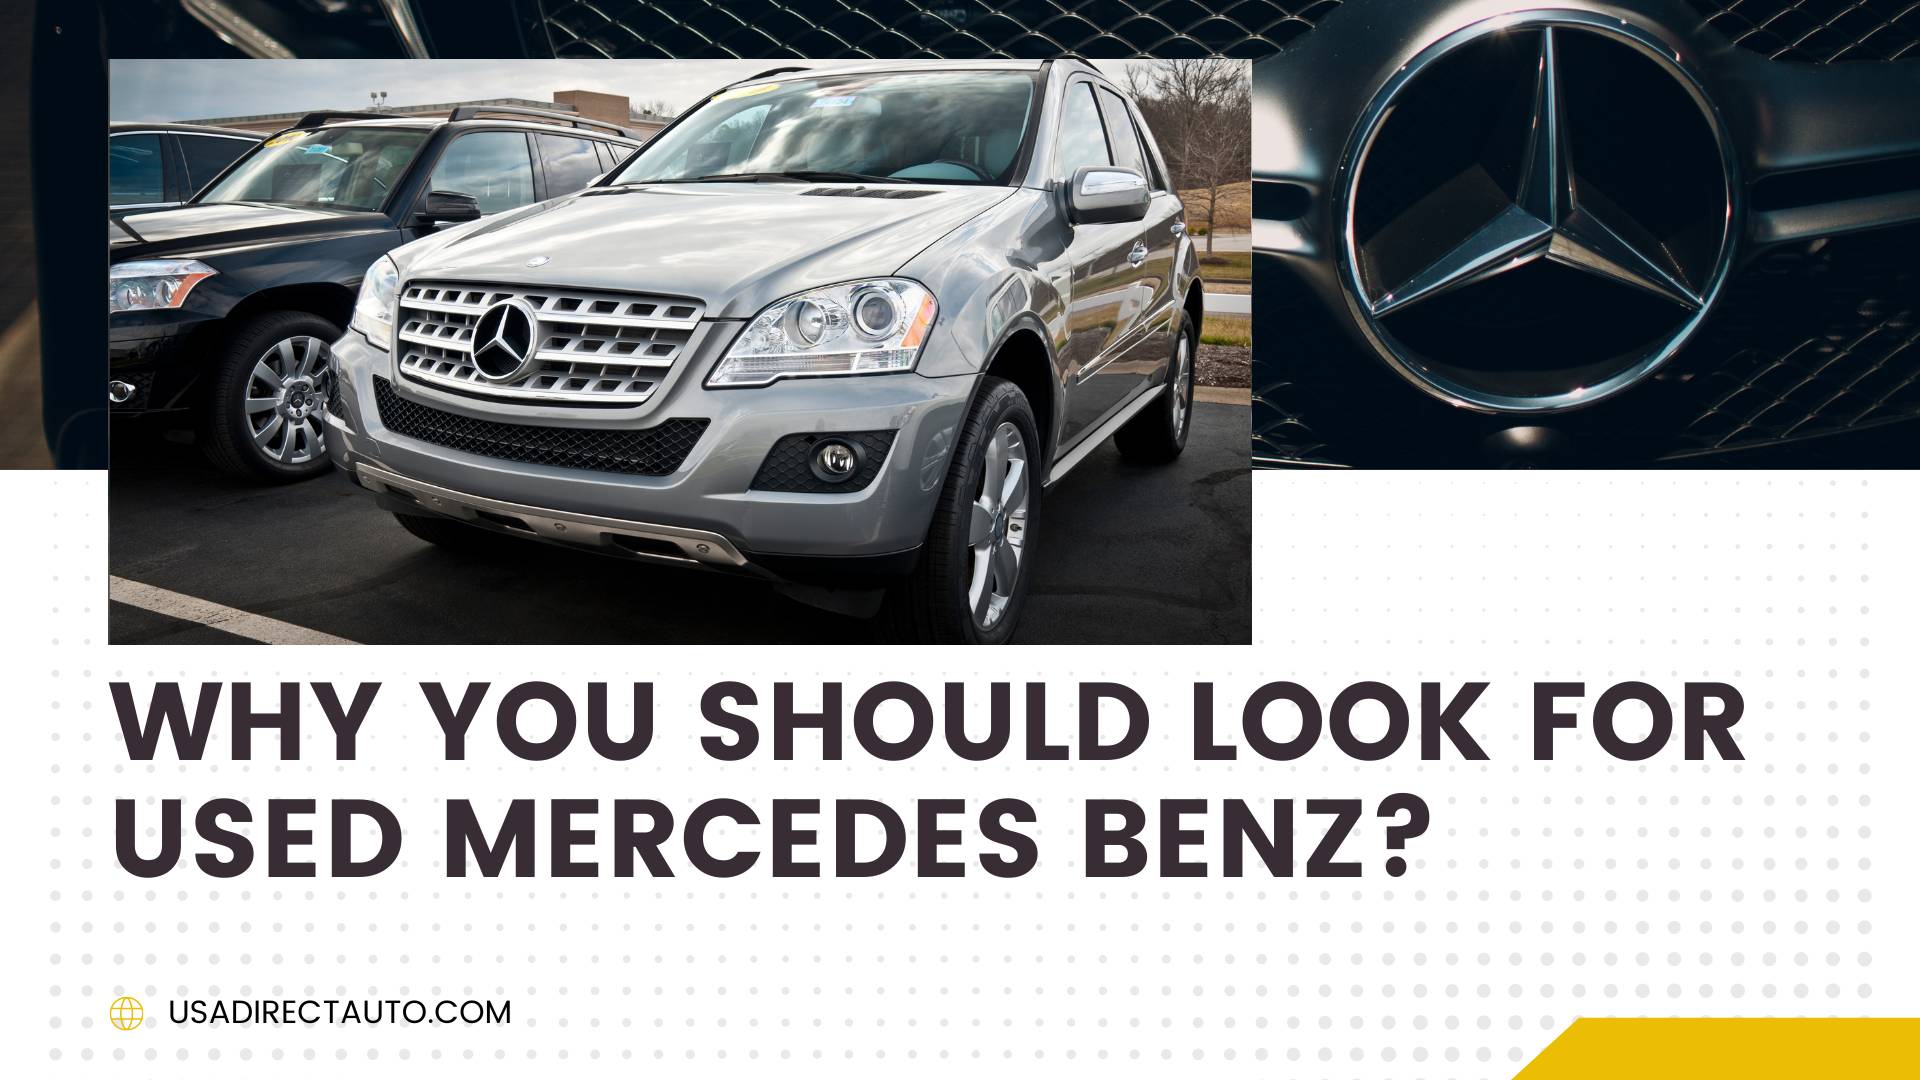 Used Mercedes Benz